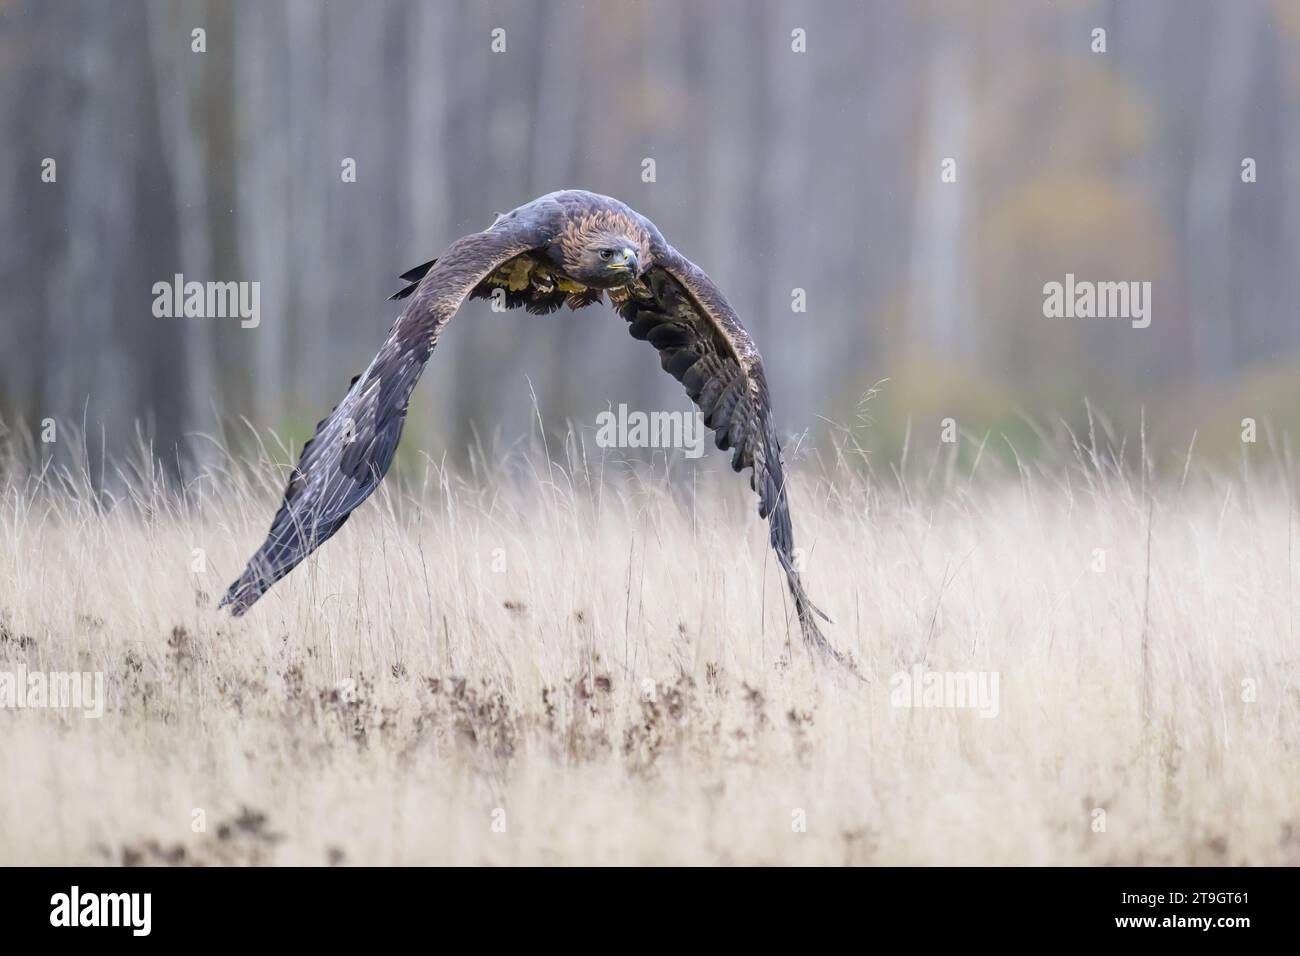 A golden eagle flies low over the ground and prepares to land. Stock Photo